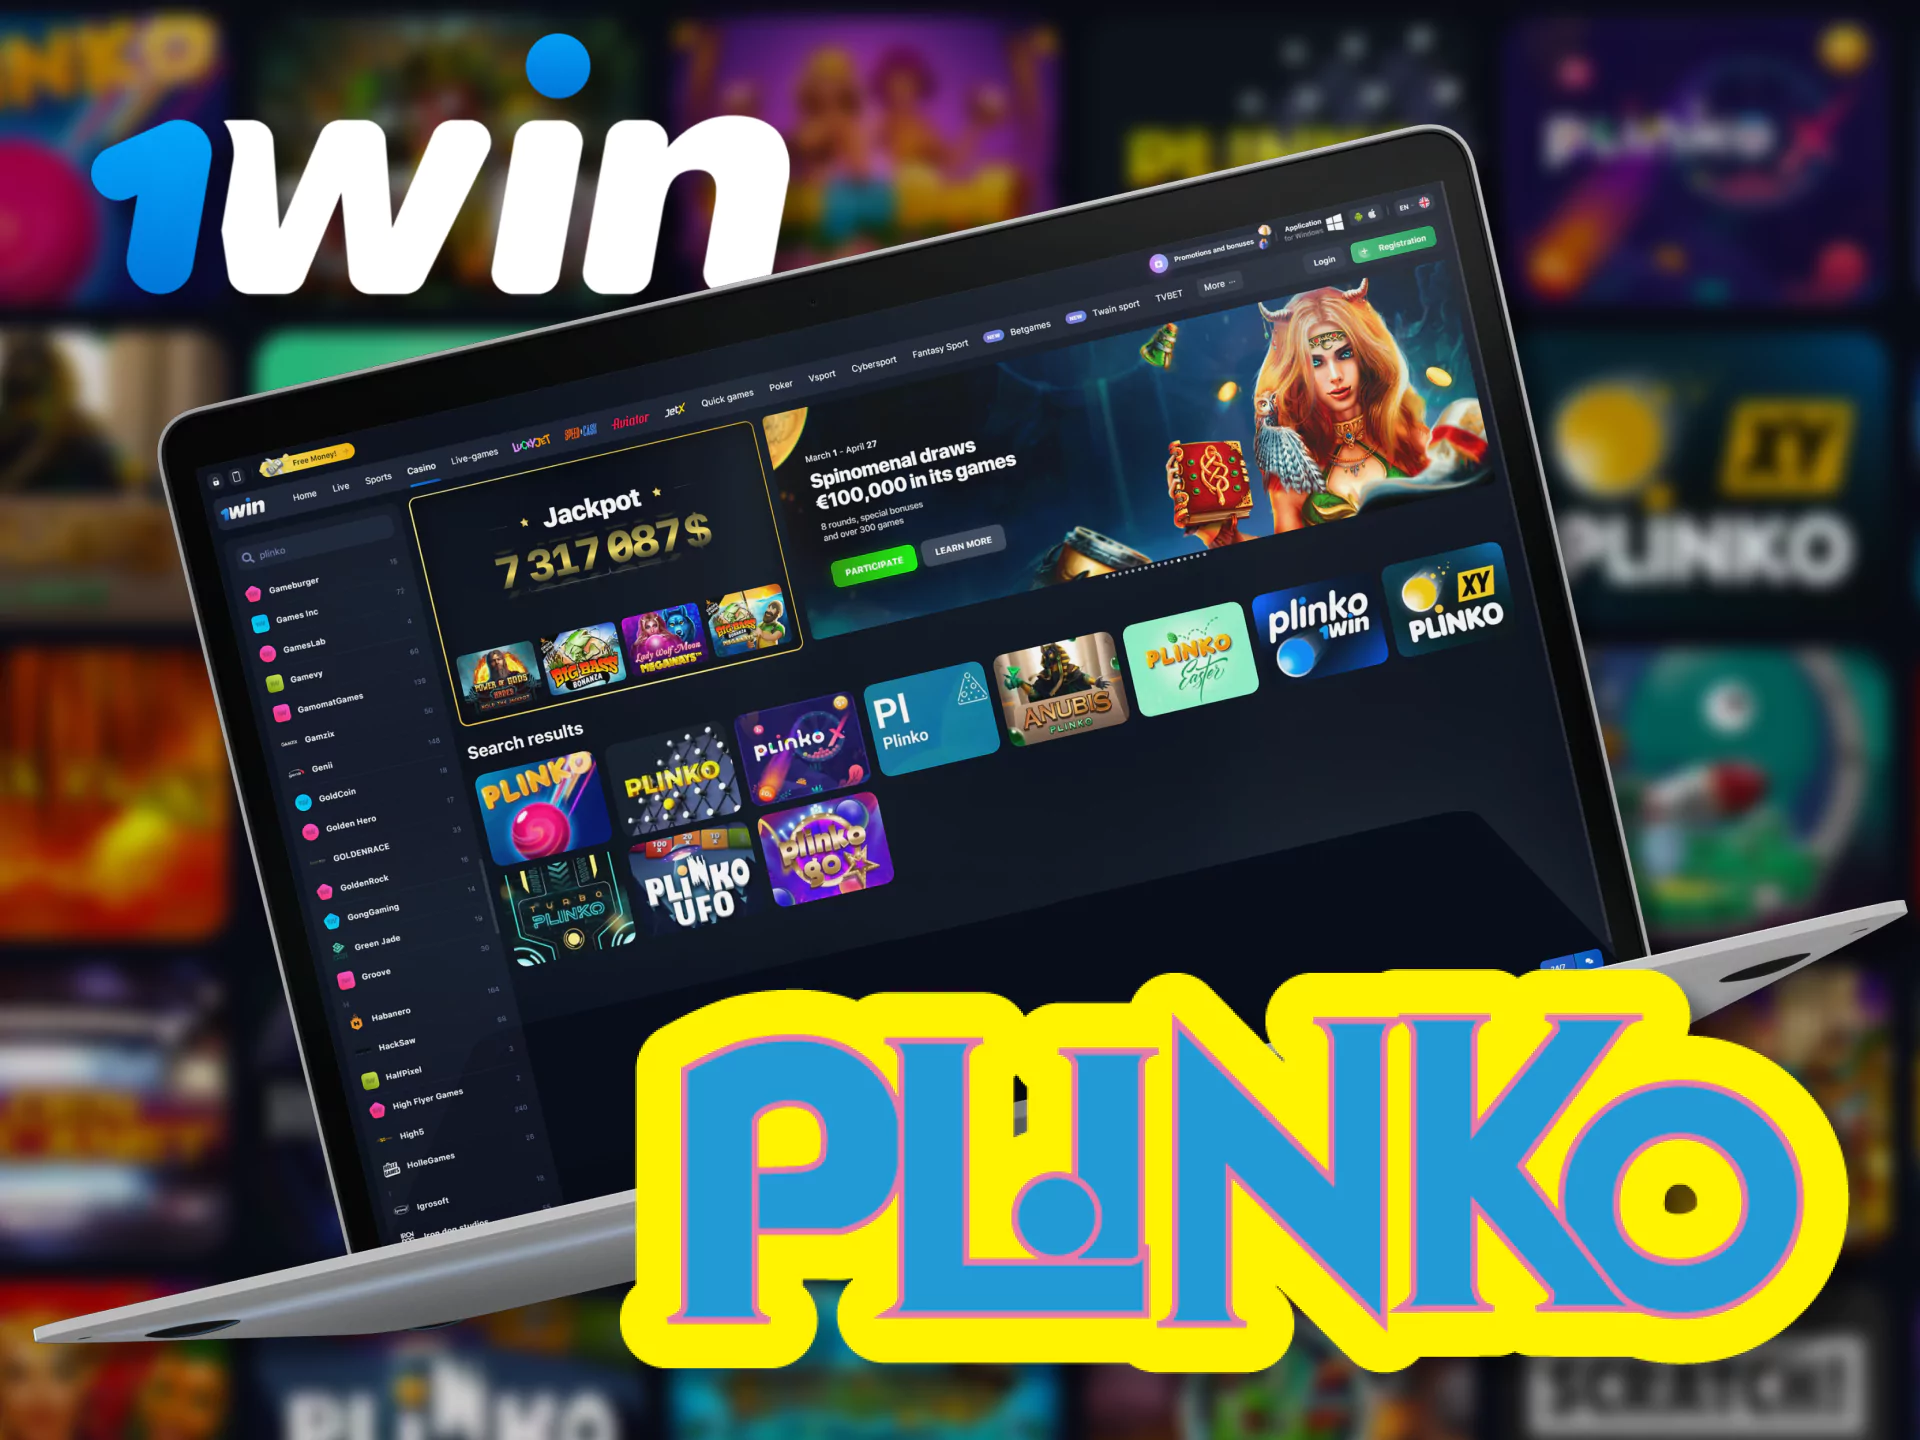 On 1Win you can play an exciting game plinko.